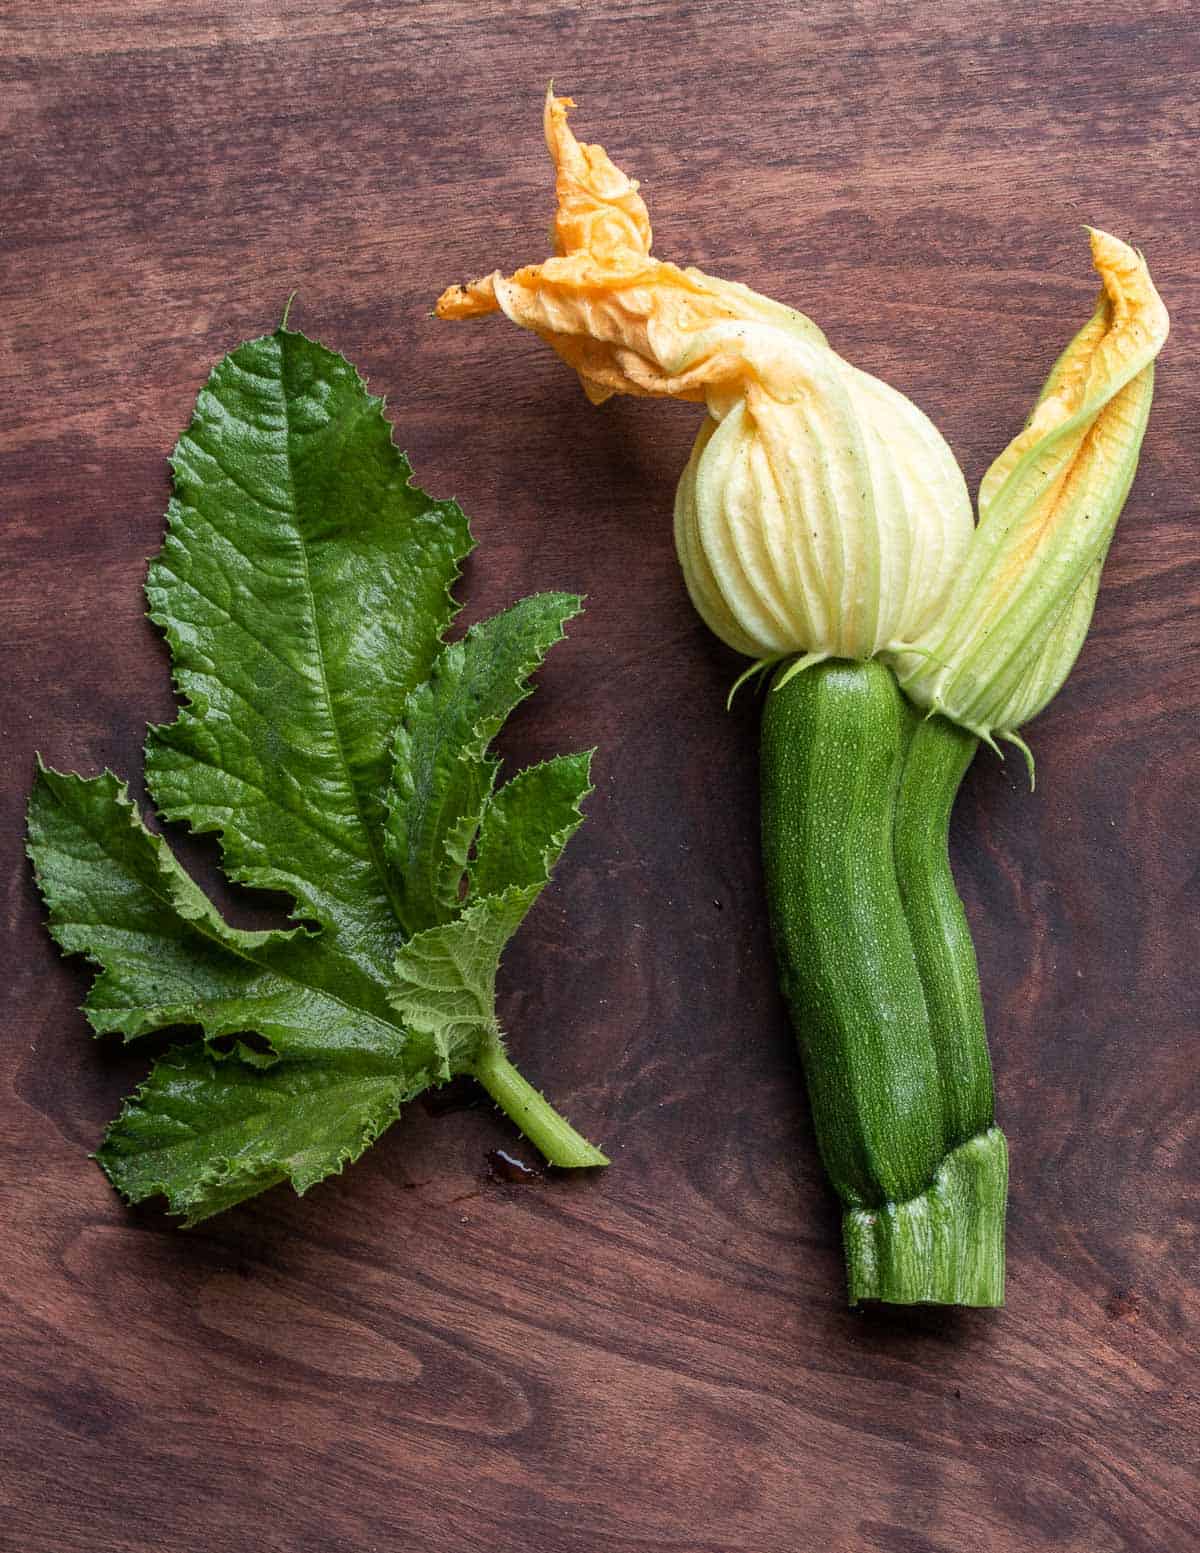 Squash blossoms and leaves or guias. 